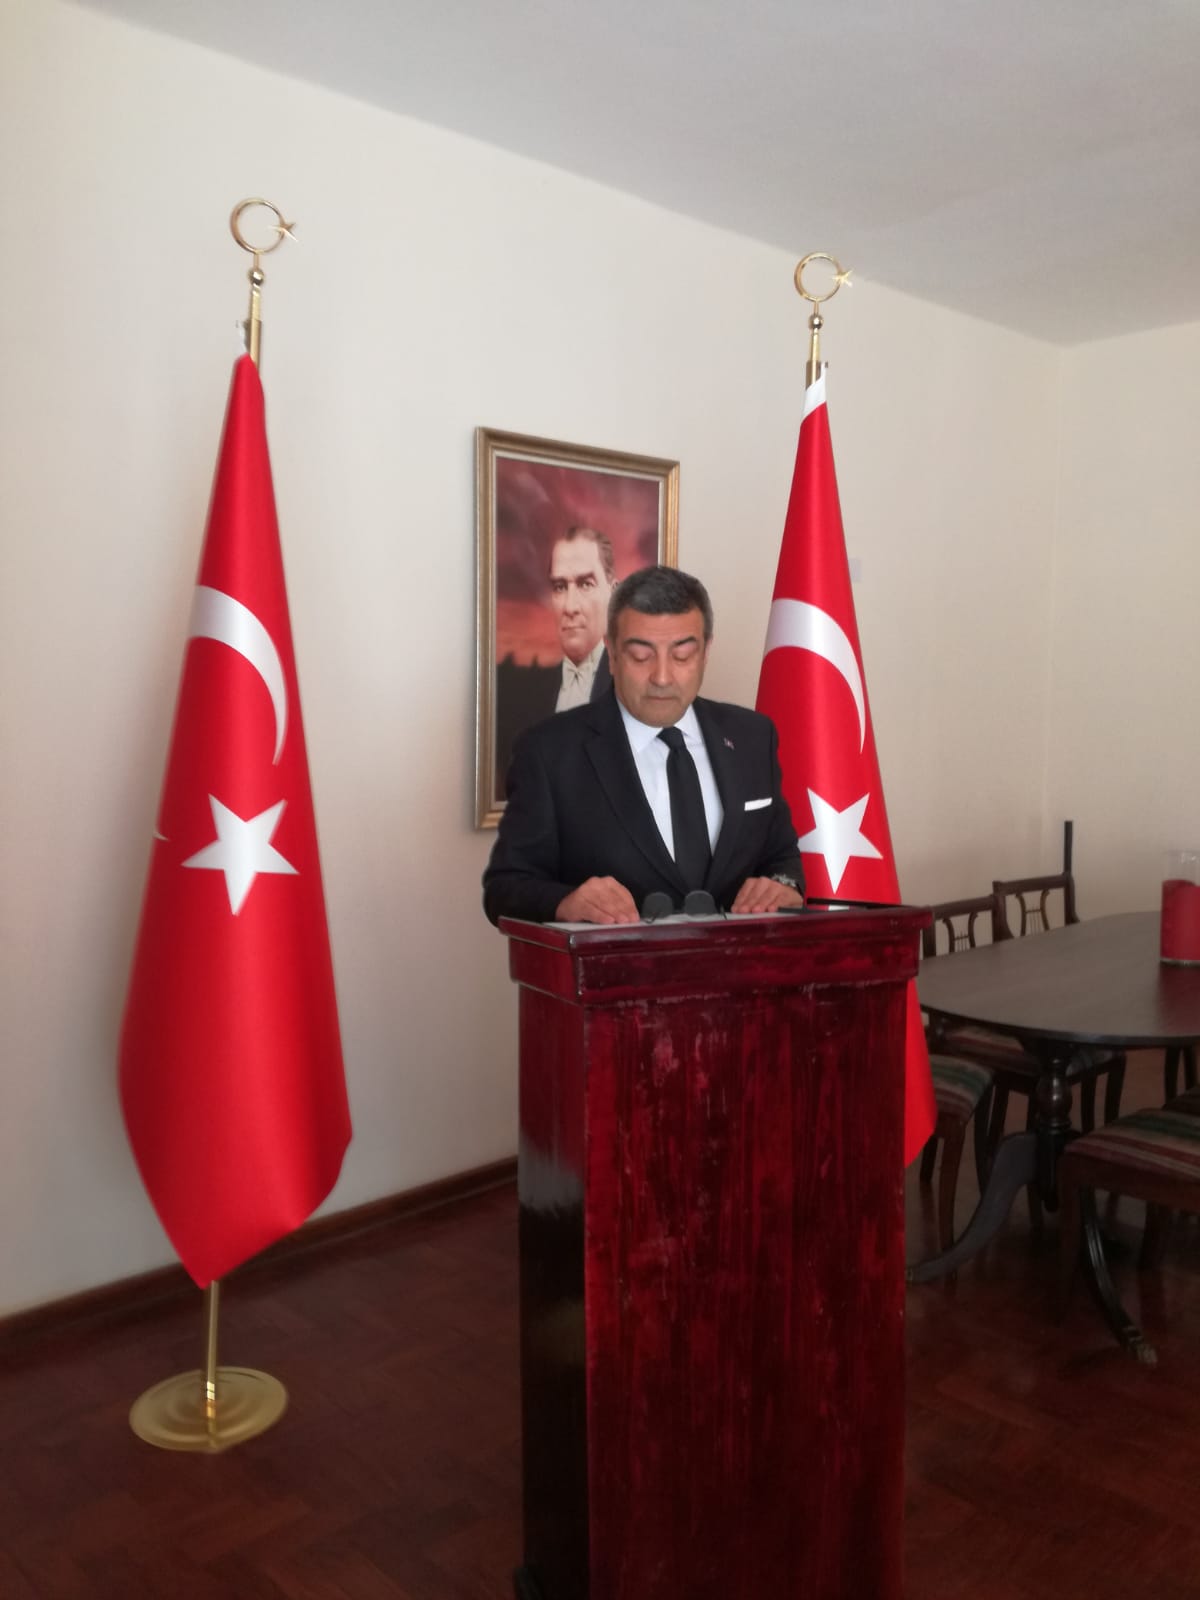 Embassy of Türkiye (Turkey) strongly rejects operating through external agents